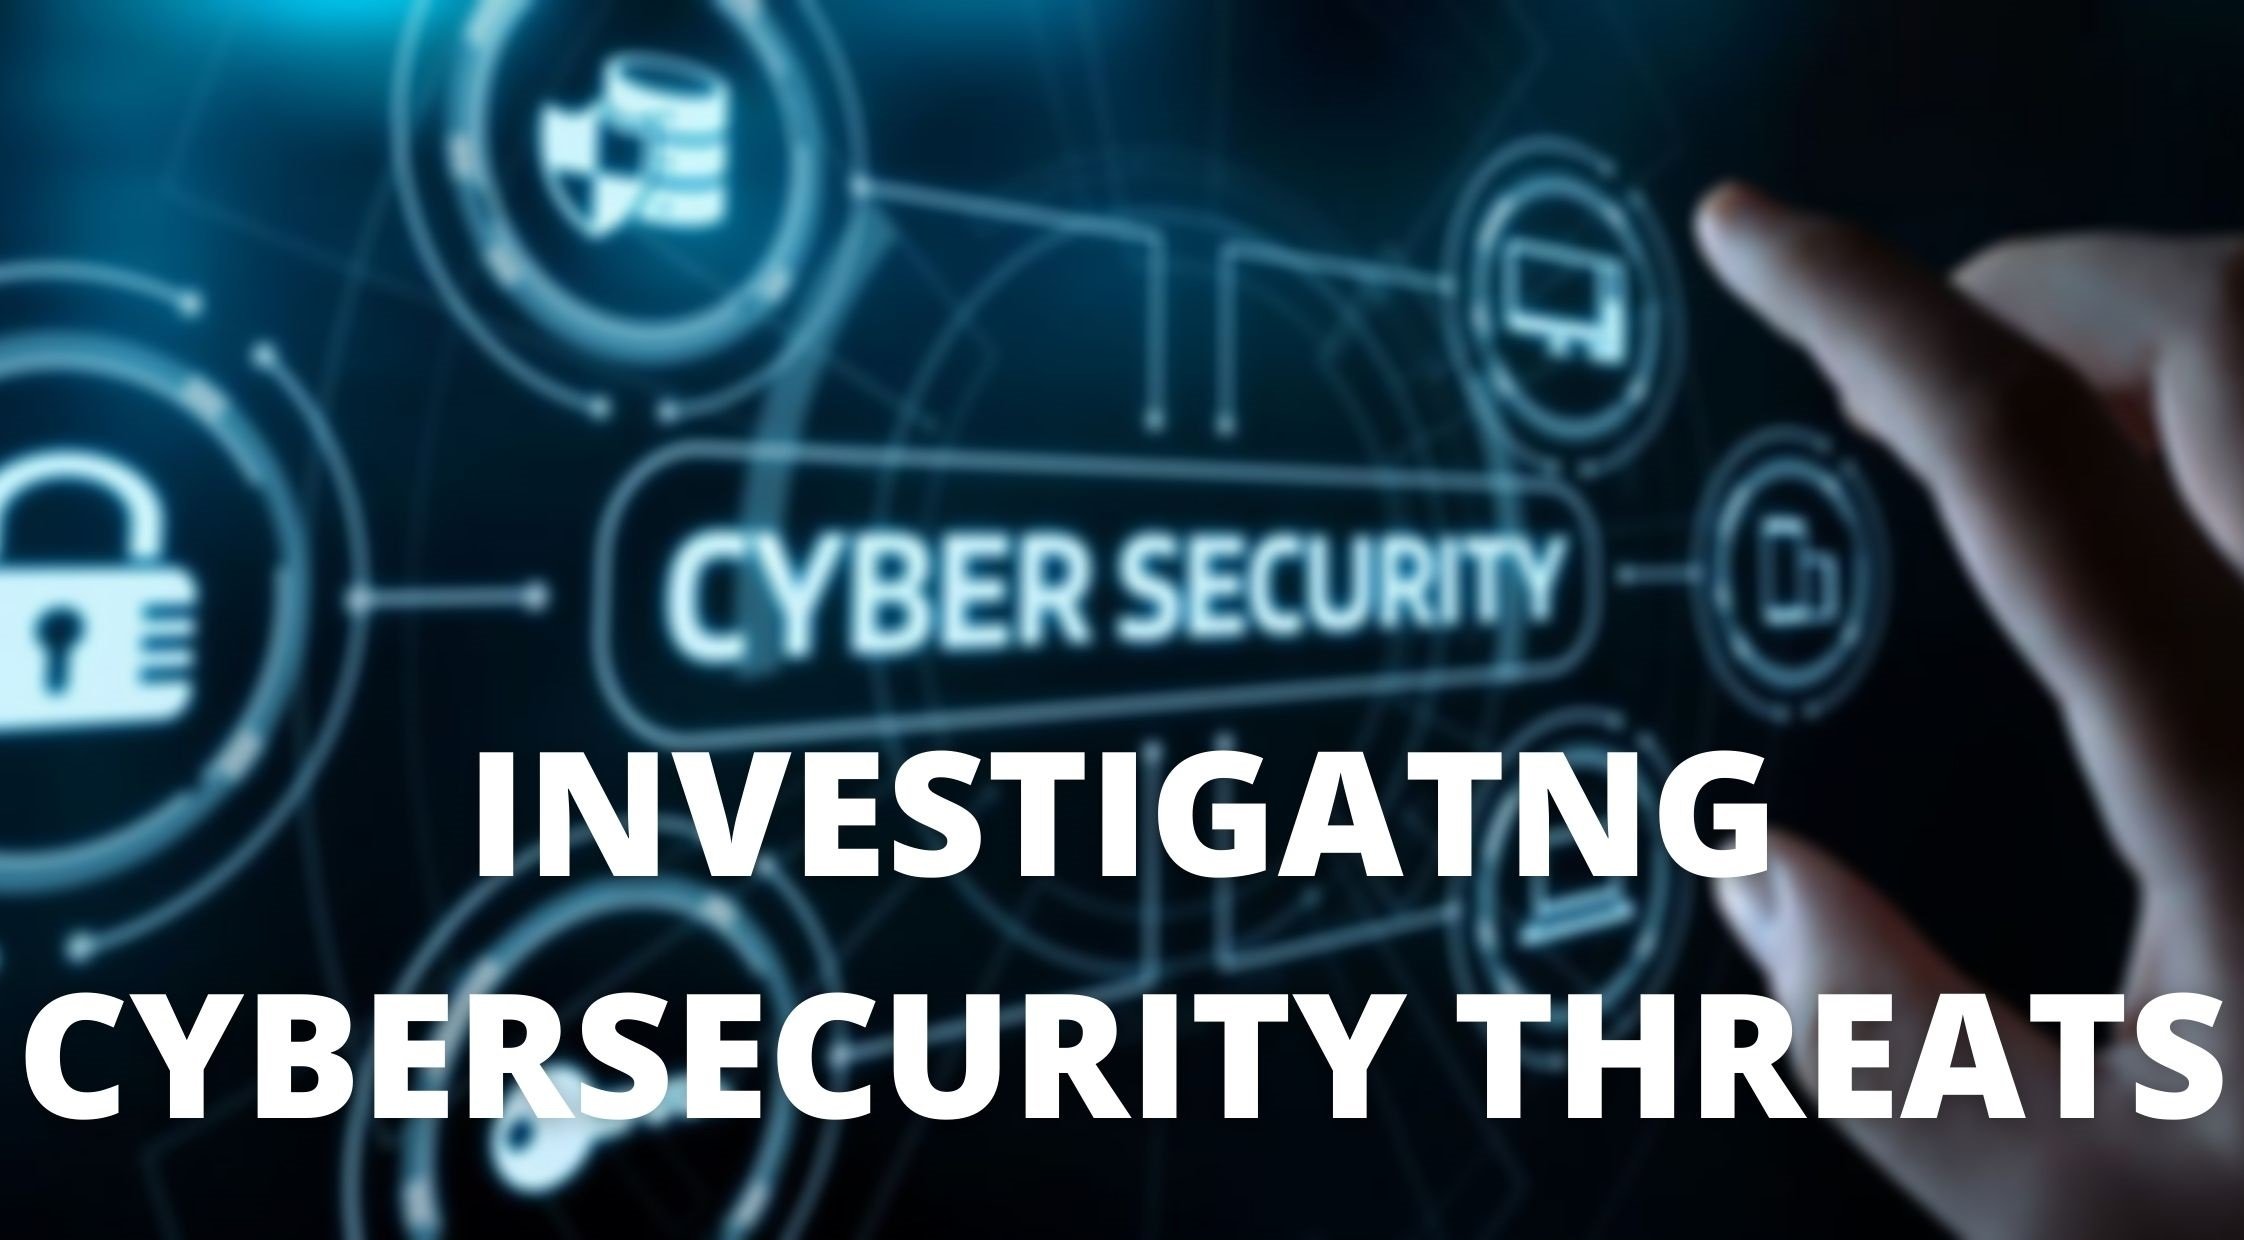 INVESTIGATING CYBER-SECURITY THREATS